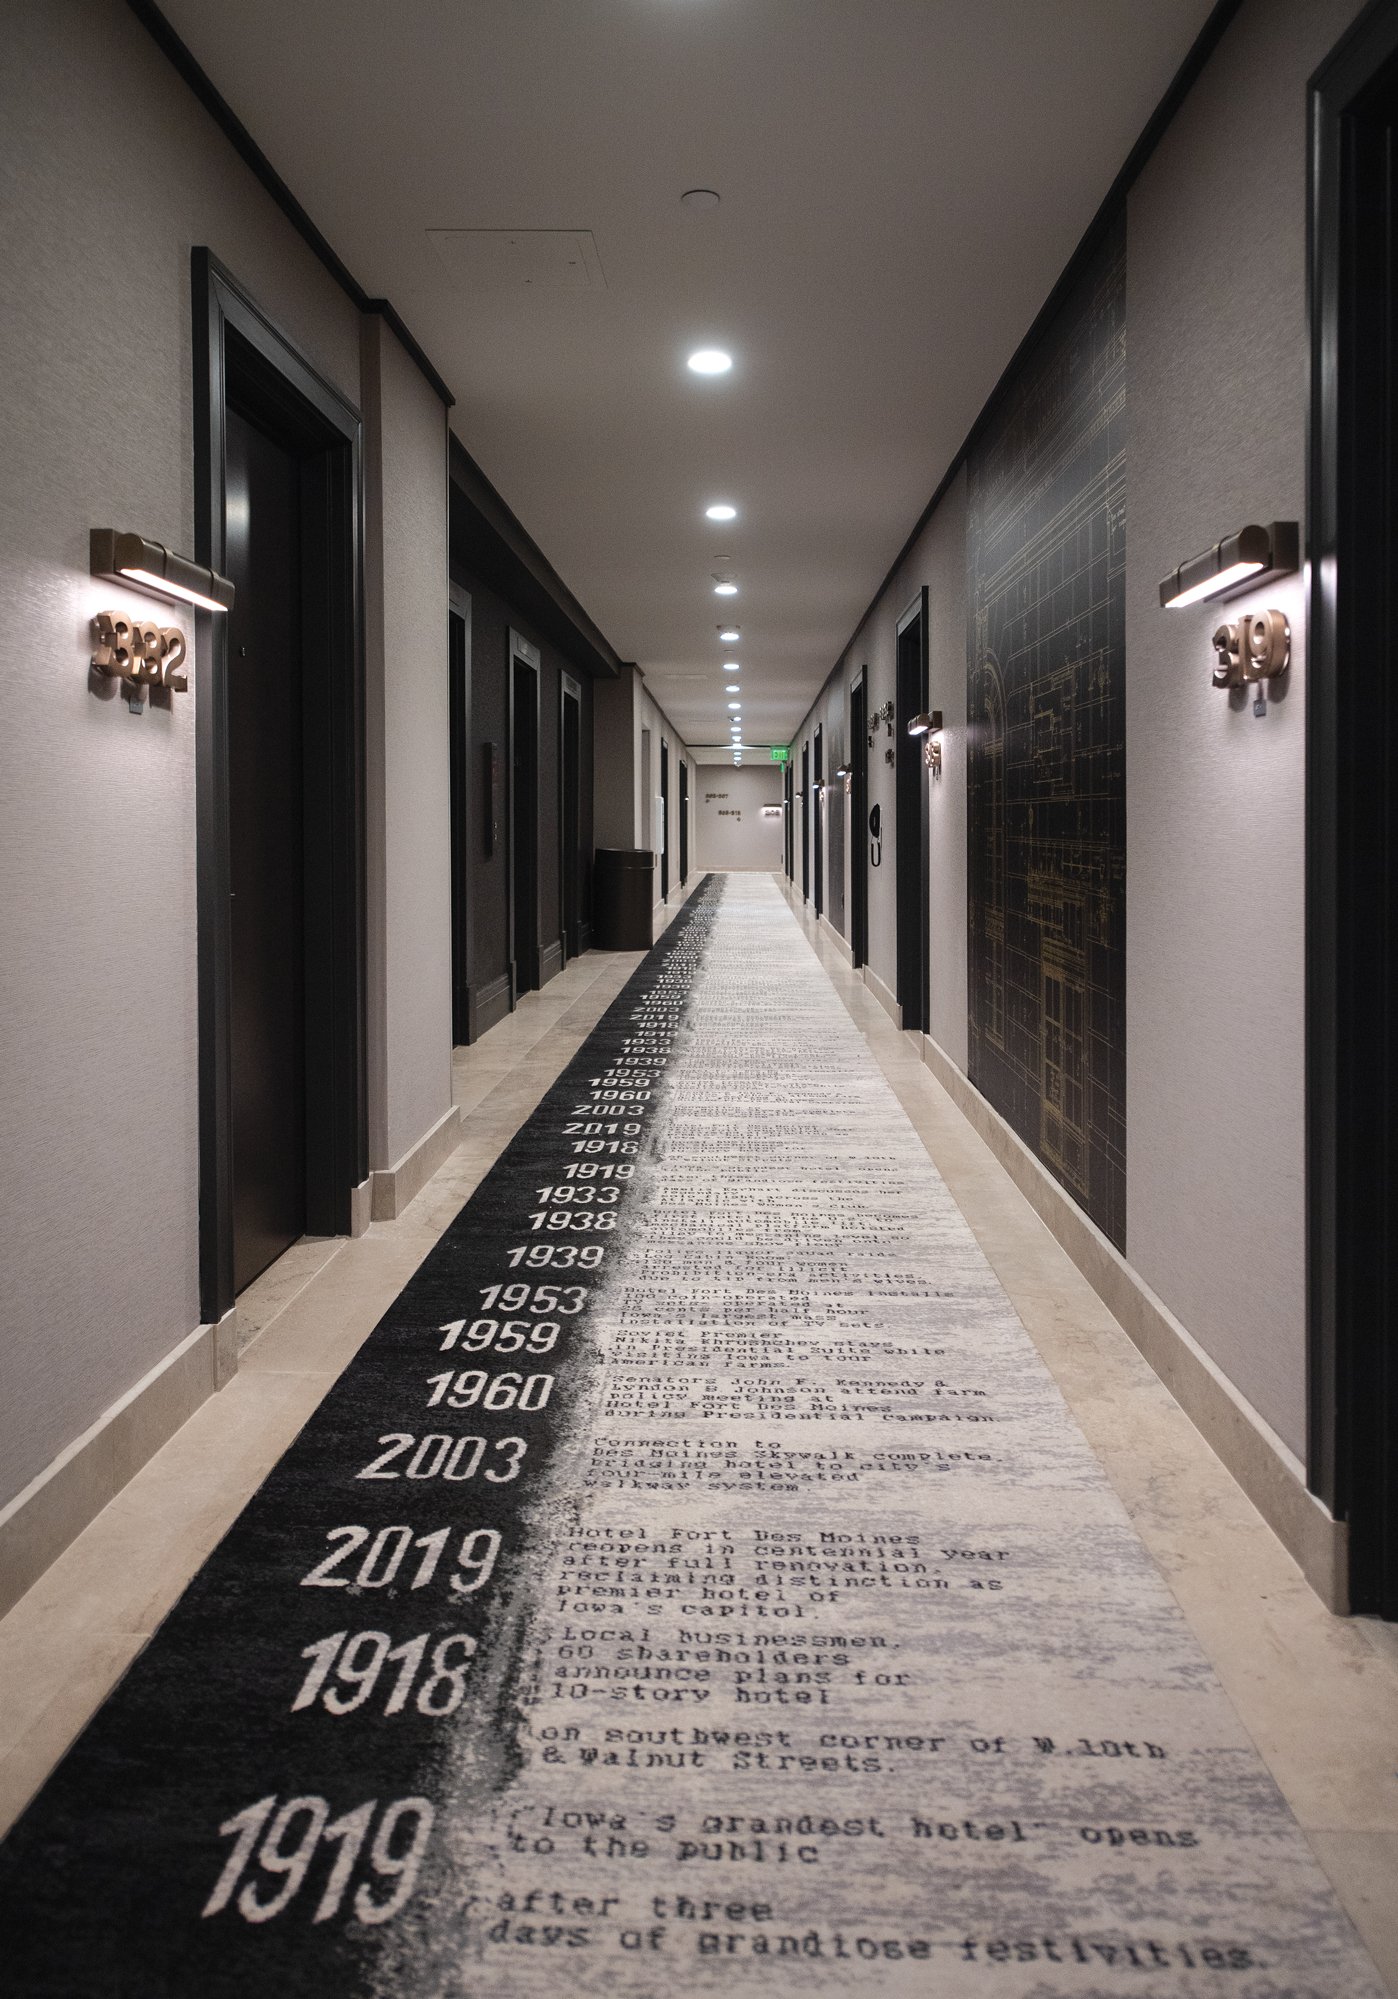  Another nod to the history of the building, the carpeting includes a historic timeline of the hotel 